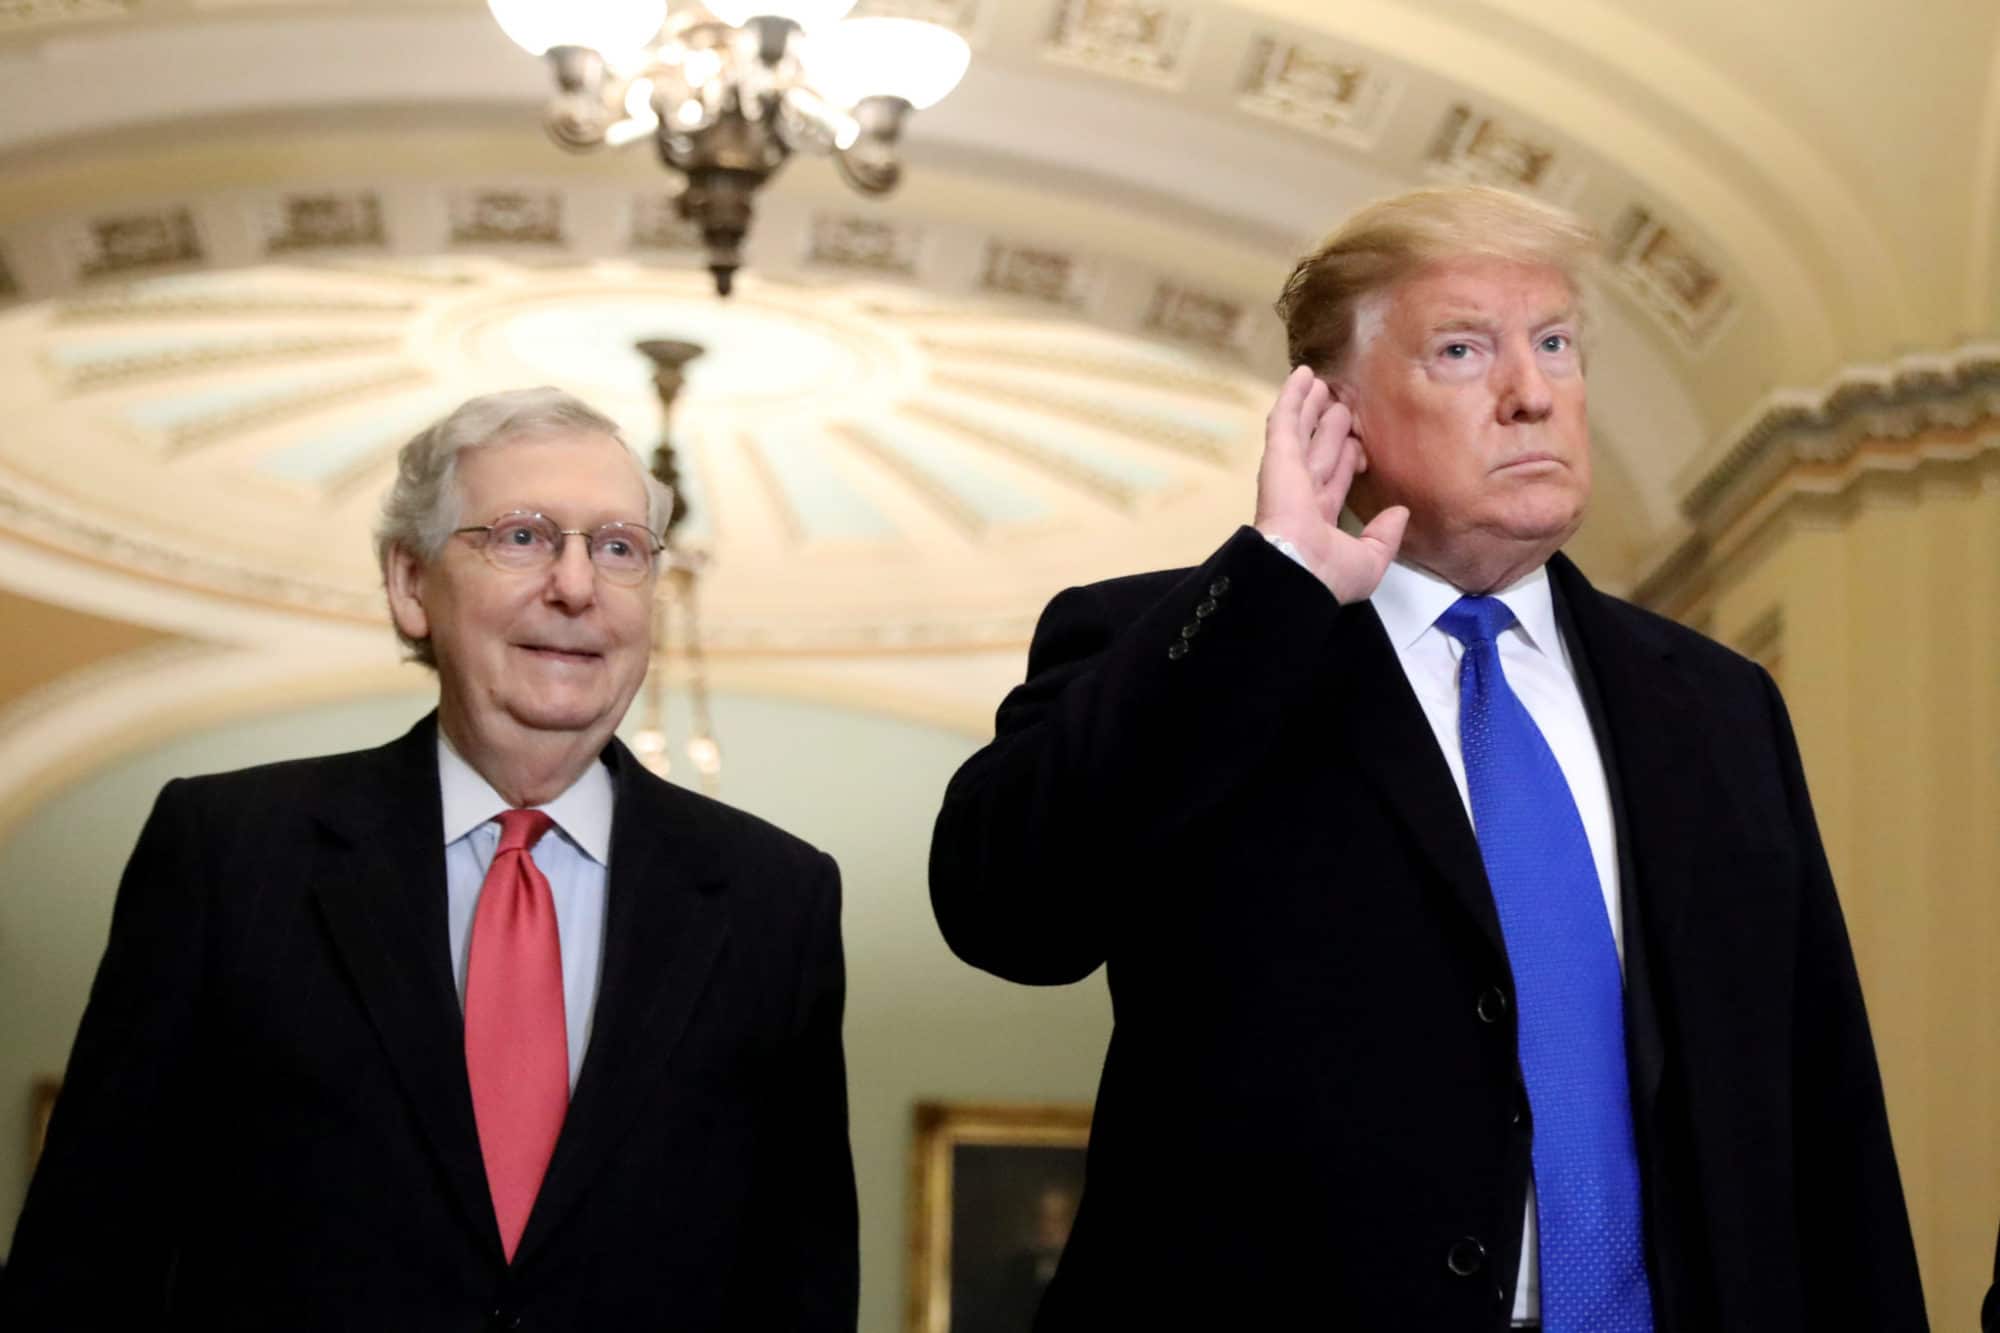 Trump is Jealous of the Power Mitch McConnell Wields